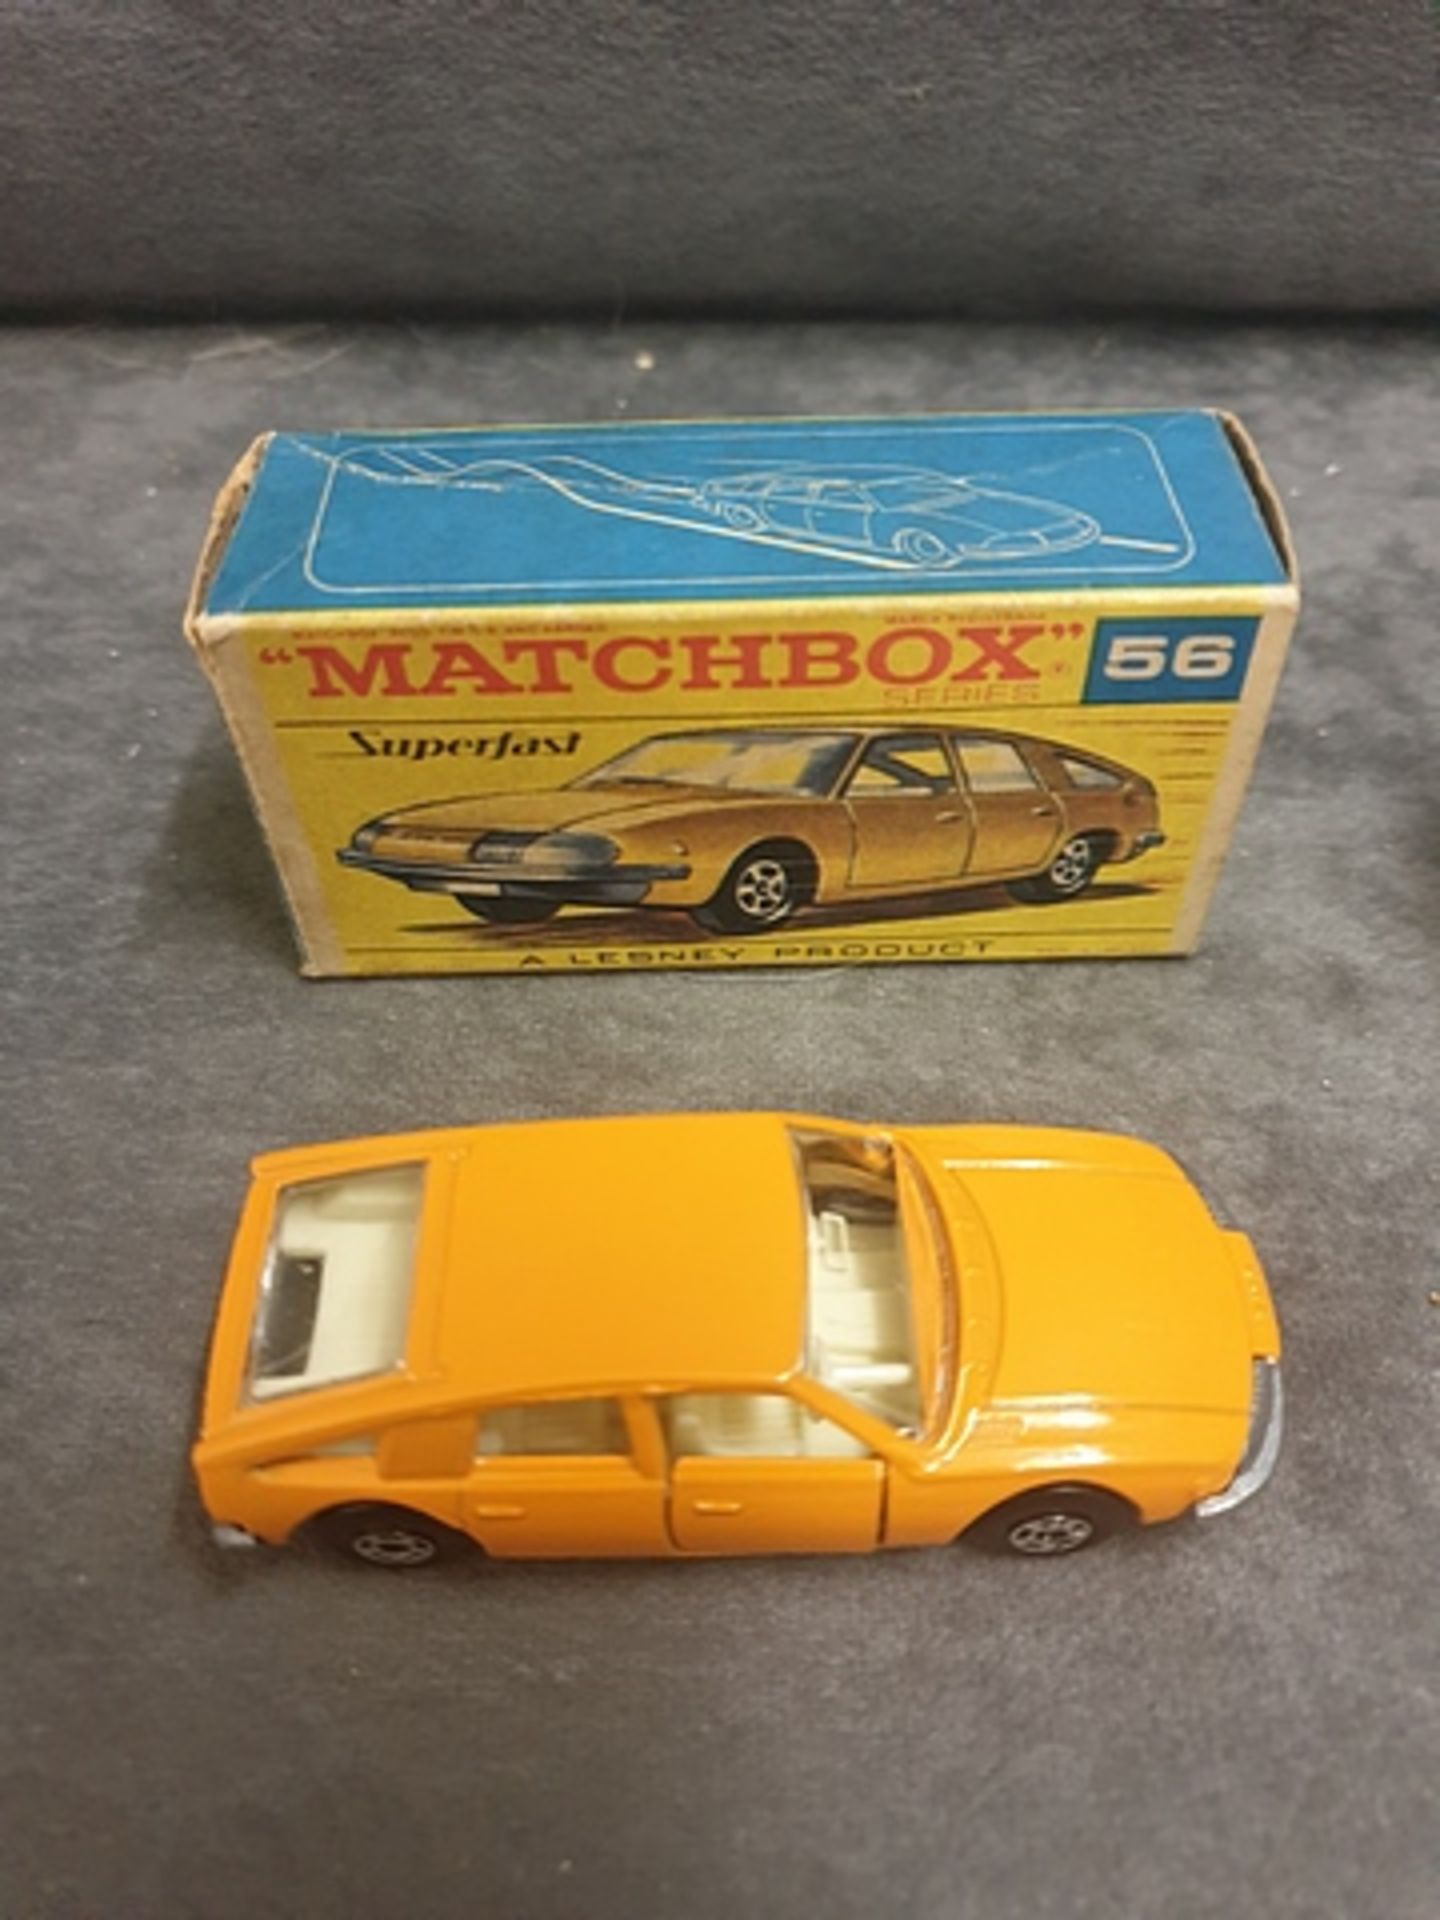 3x Matchbox Superfast Diecast Cars #56 2x Gold In Boxes One With End Flap Missing 1x Orange In - Image 3 of 4